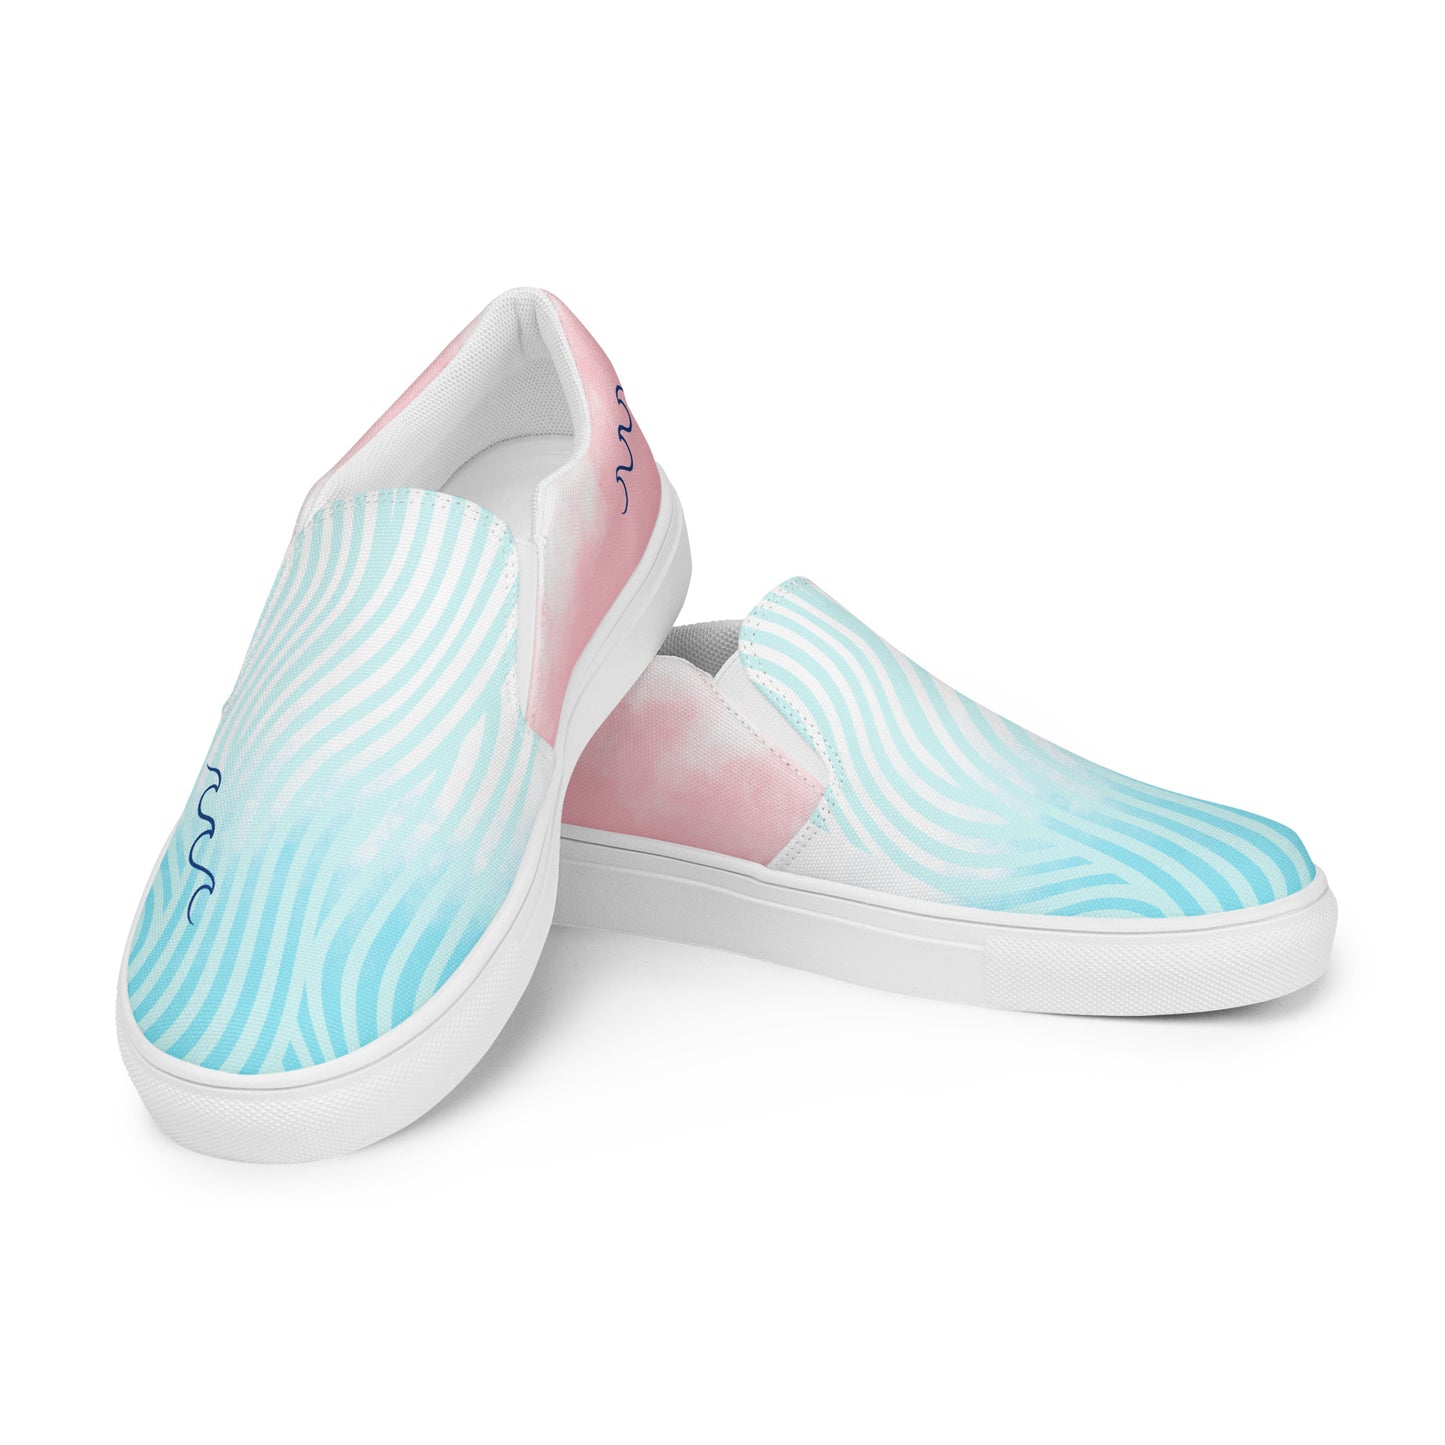 Walking on Waves Women’s slip-on canvas shoes by Our BoatyVerse